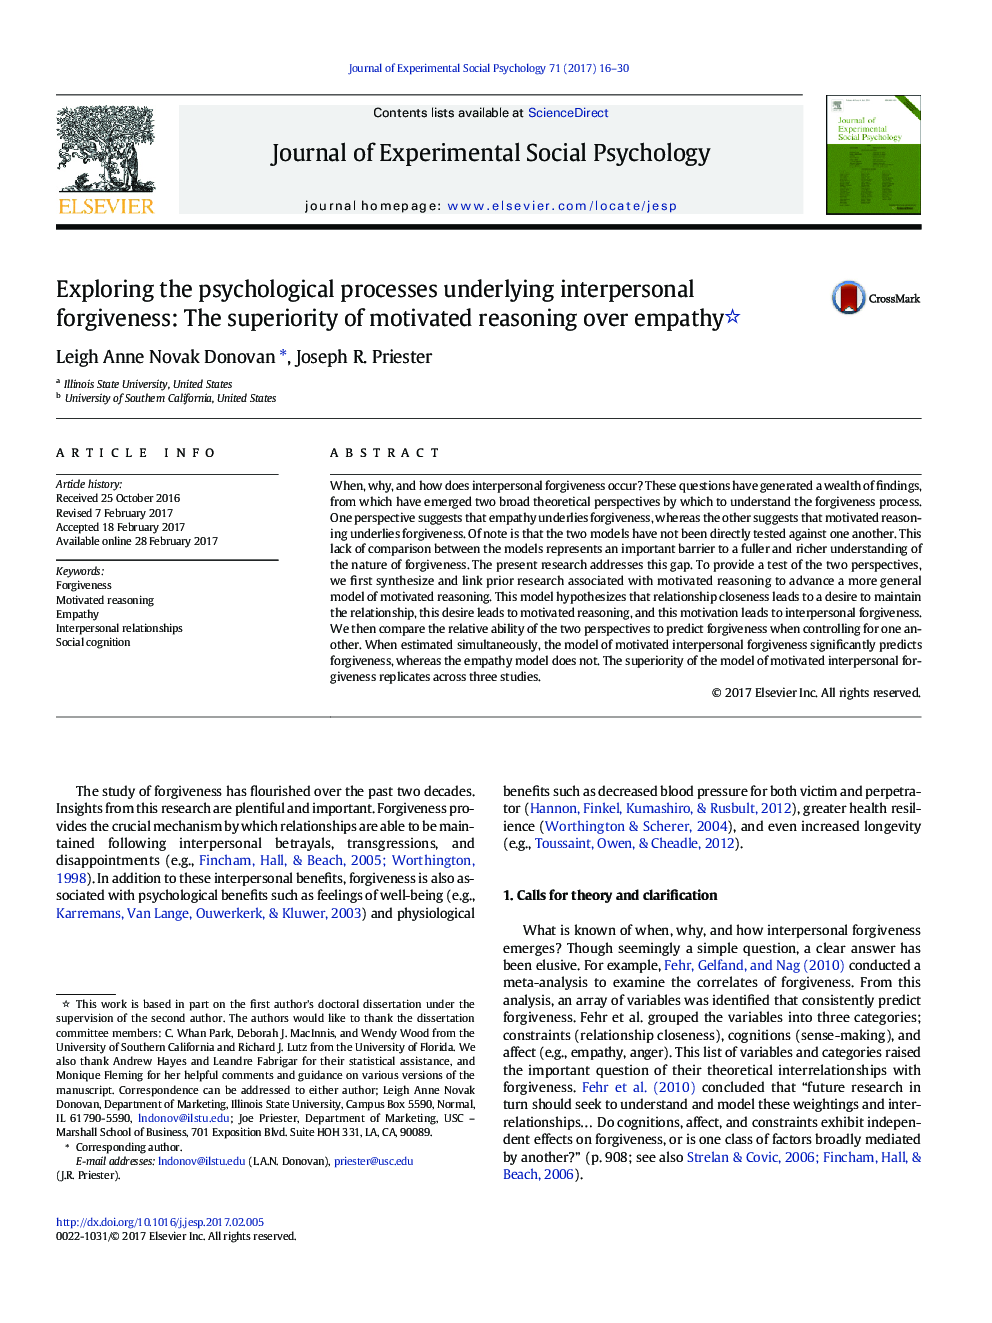 Exploring the psychological processes underlying interpersonal forgiveness: The superiority of motivated reasoning over empathy